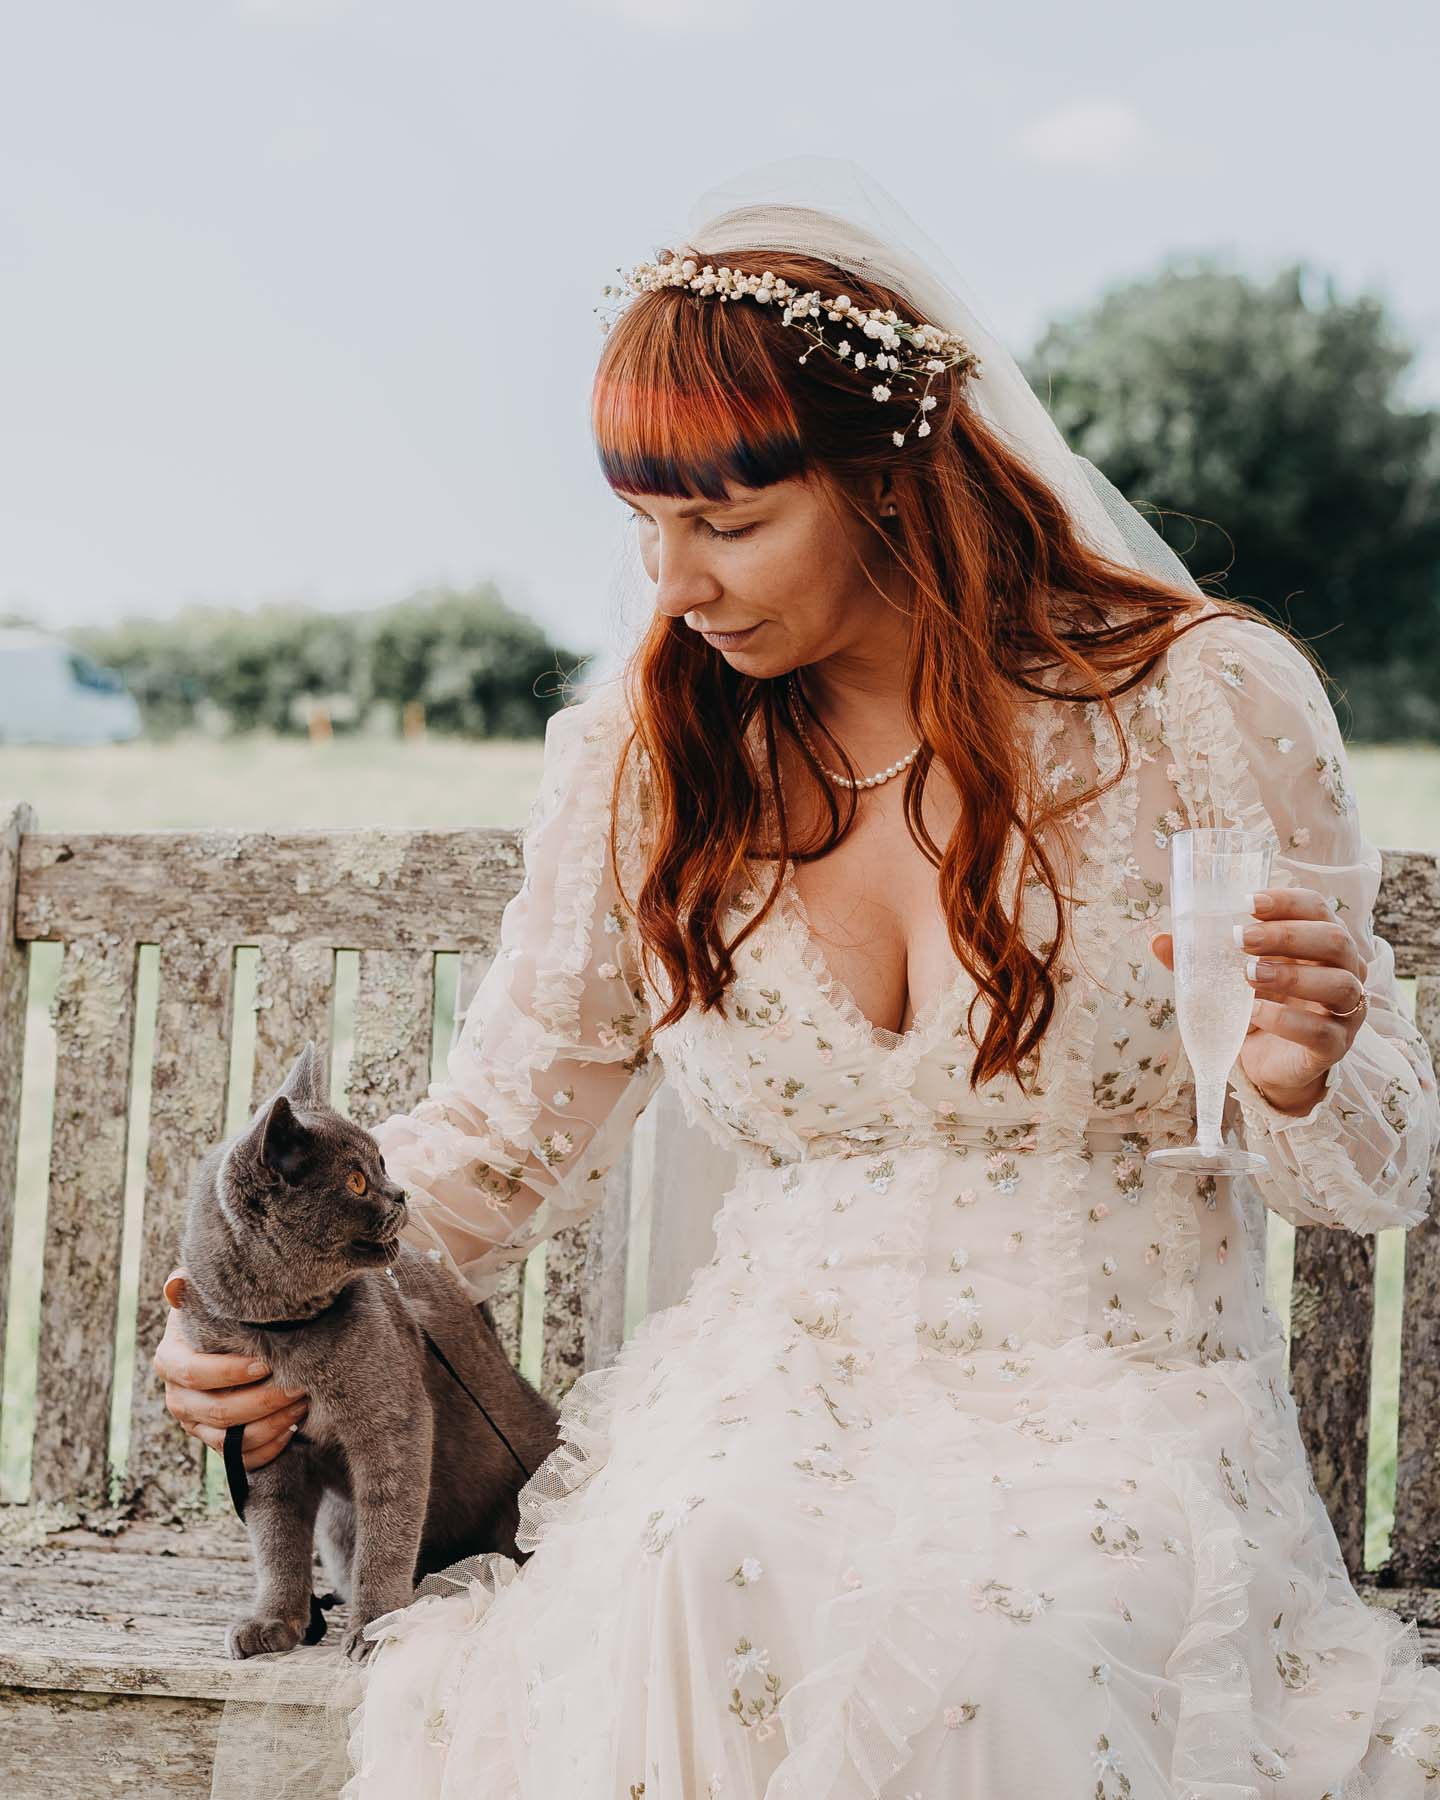 The bride with her cat